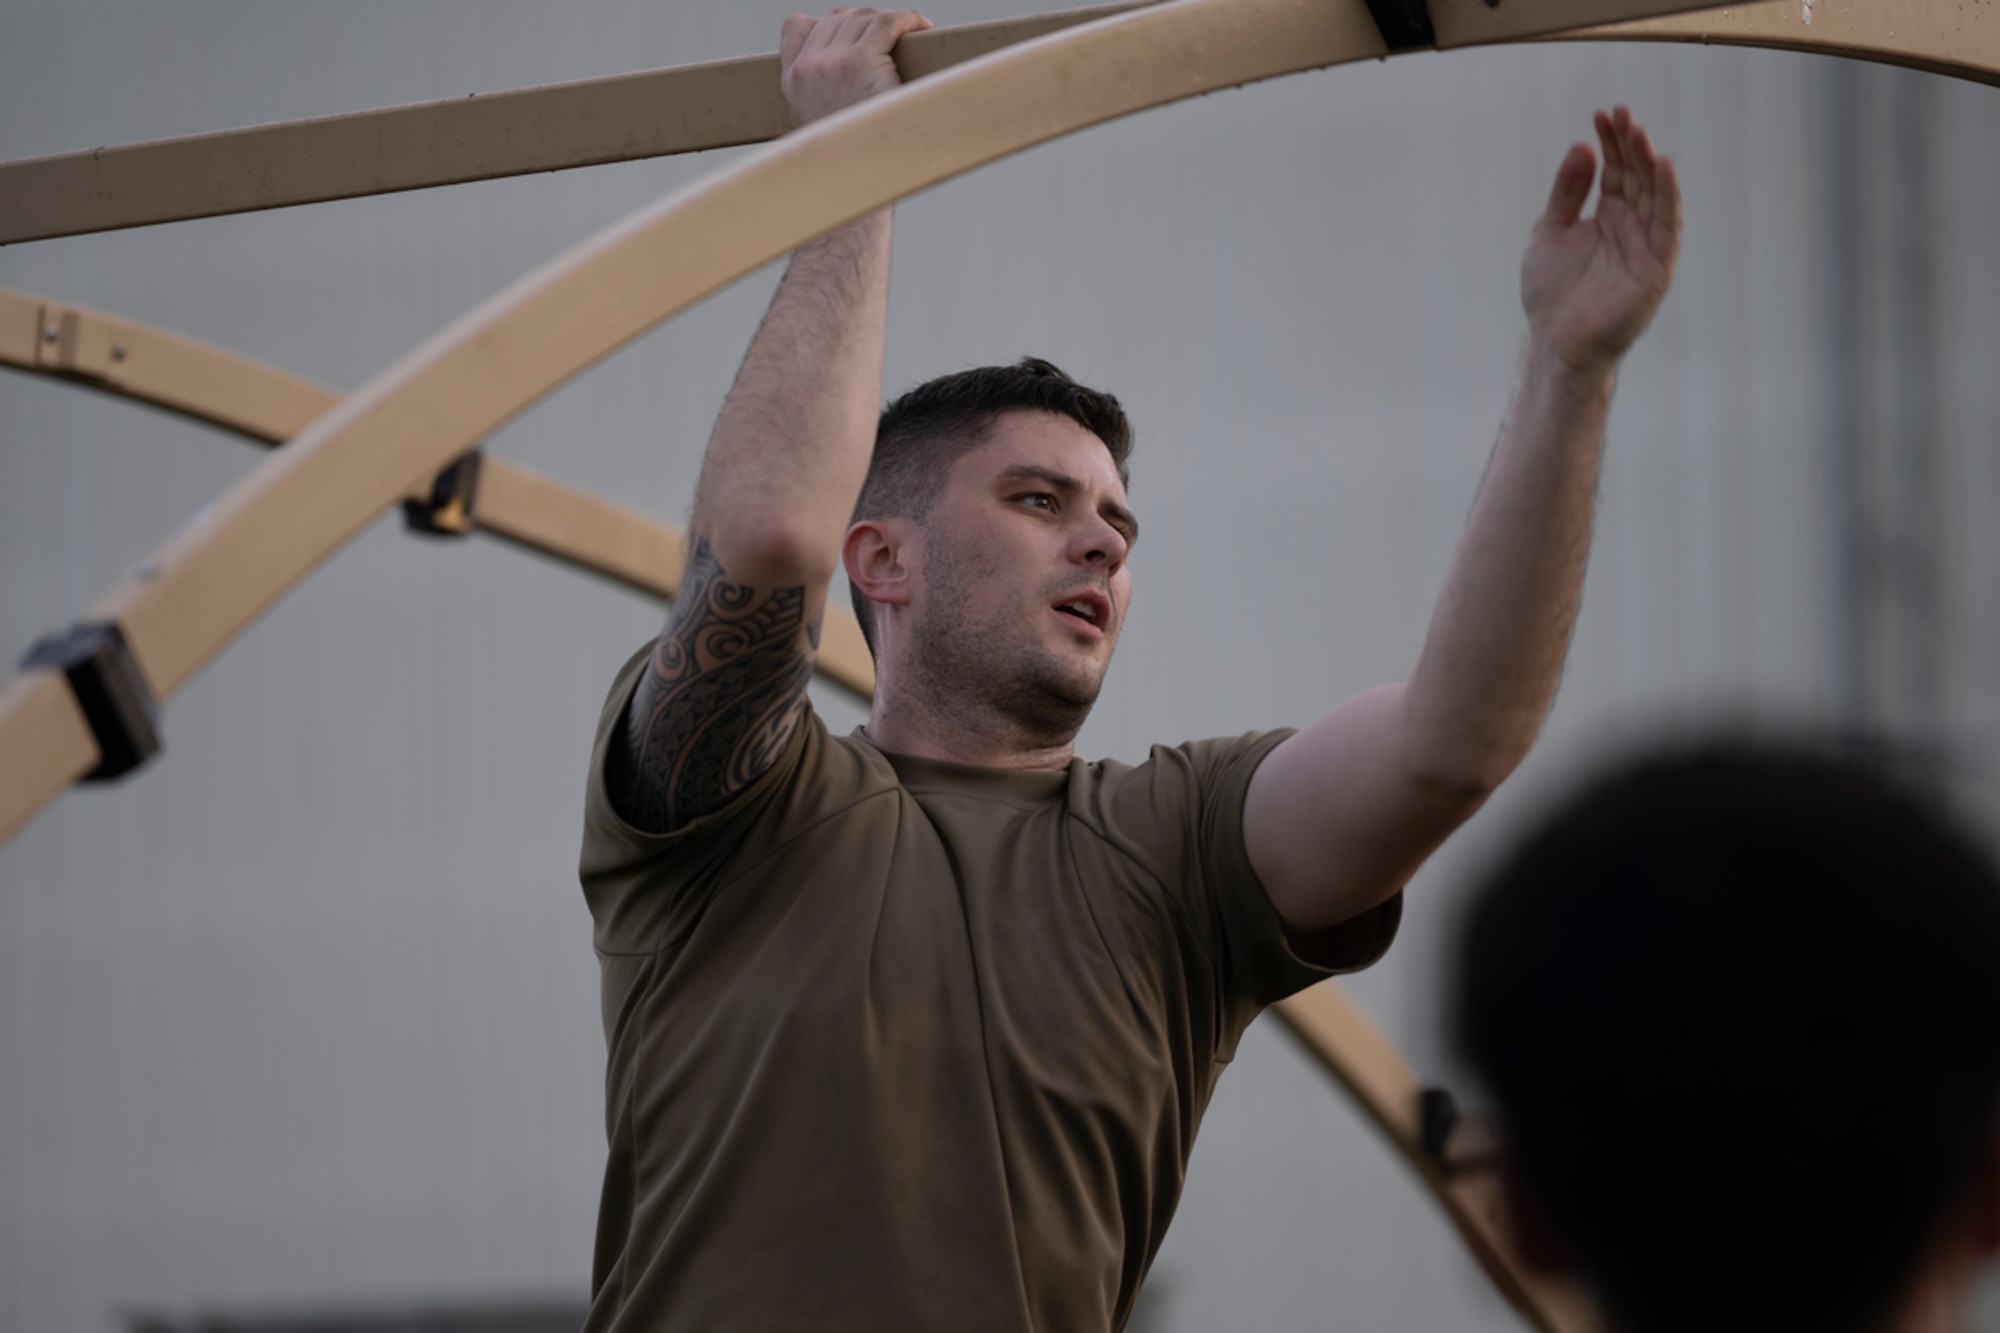 A U.S. Air Force Airman assigned to the 23rd Wing helps build a tent during exercise Mosaic Tiger 24-1 at Avon Park Air Force Range, Florida, Nov. 13, 2023. The tent served as a rapidly constructed location to run command and control capabilities. (U.S. Air Force photo by Senior Airman Rachel Coates)